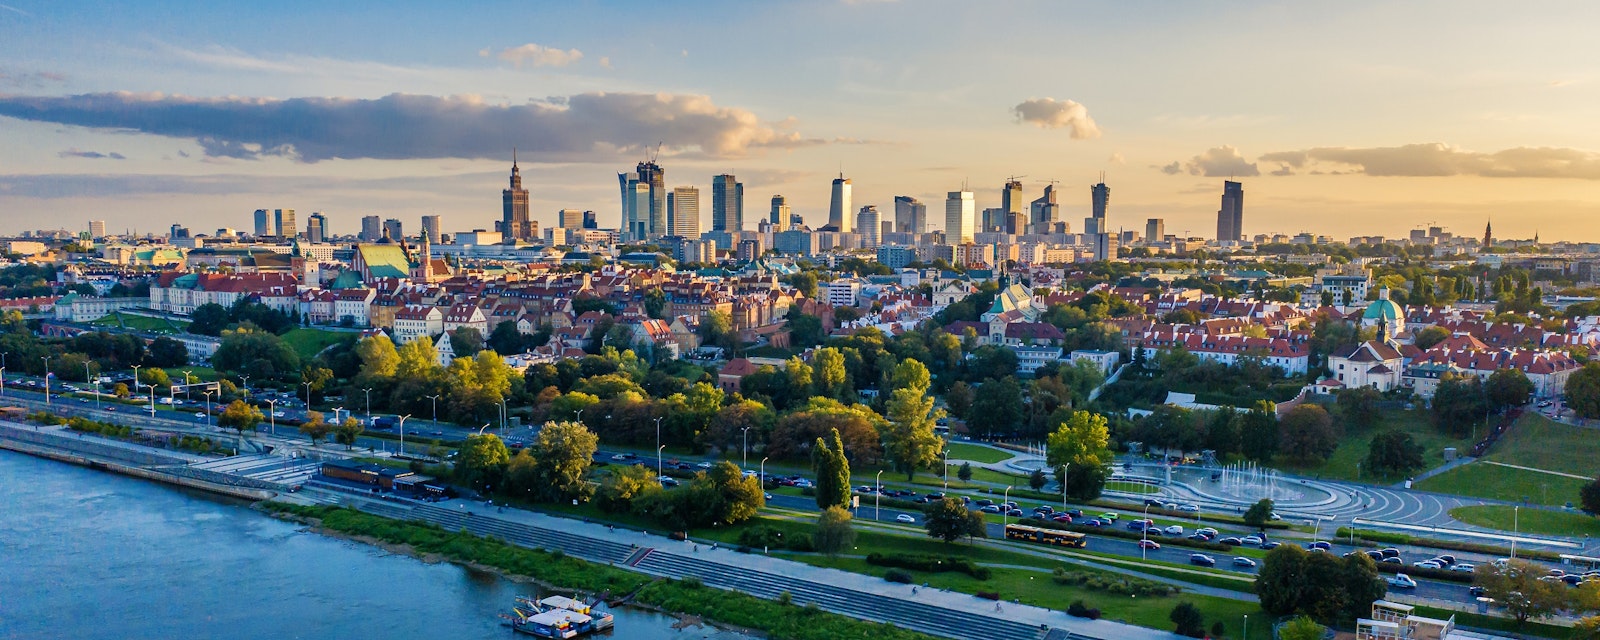 Warsaw,City,Center,Aerial,View